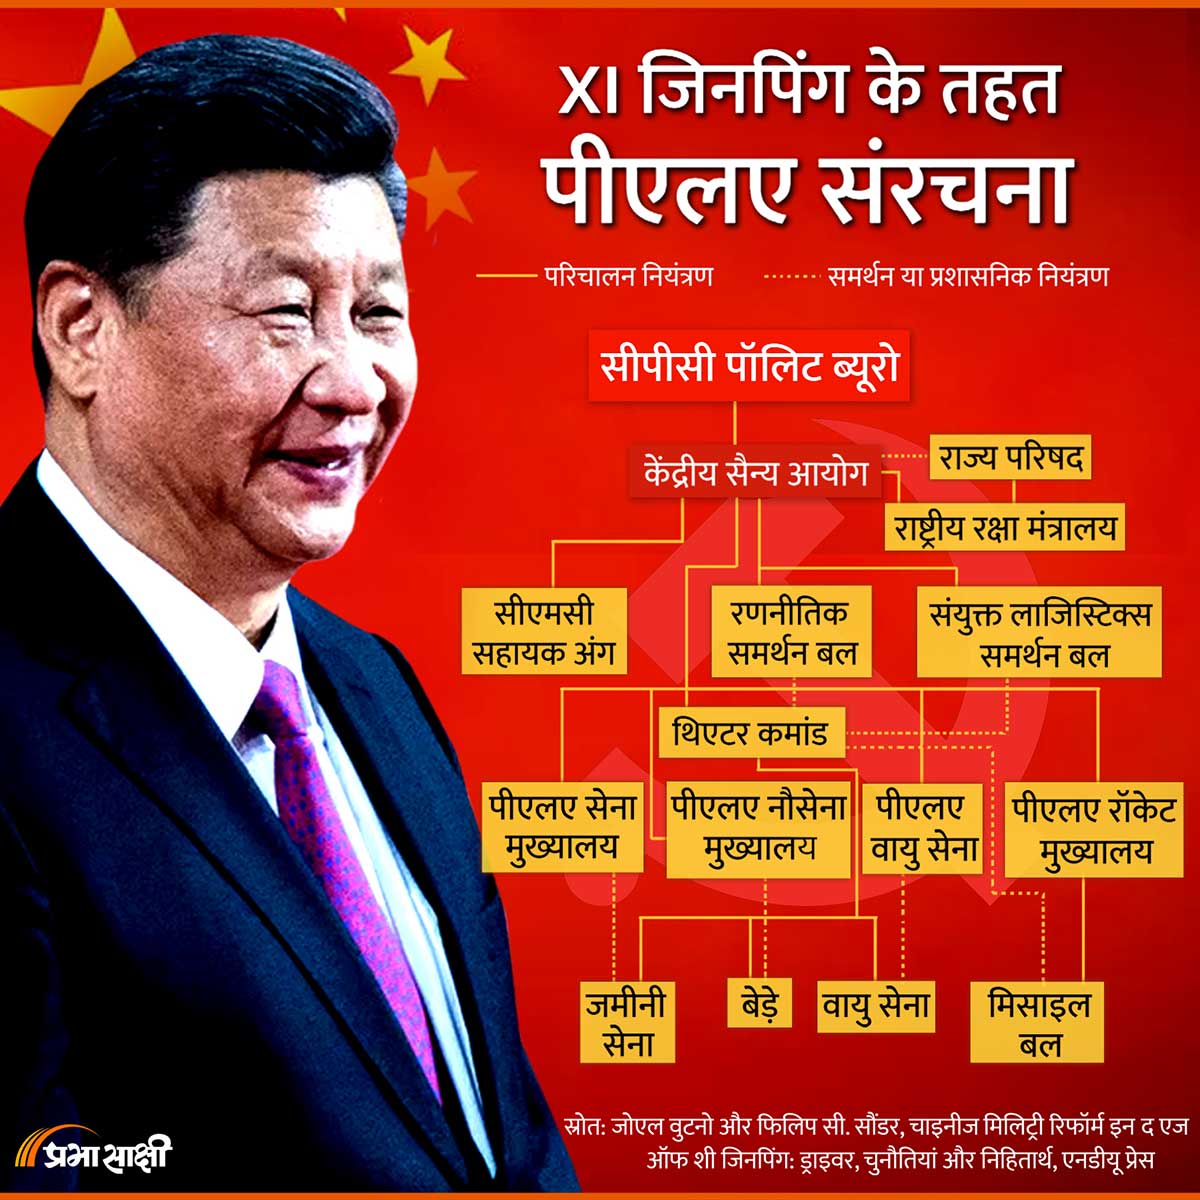 PLA structure under Xi Jinping